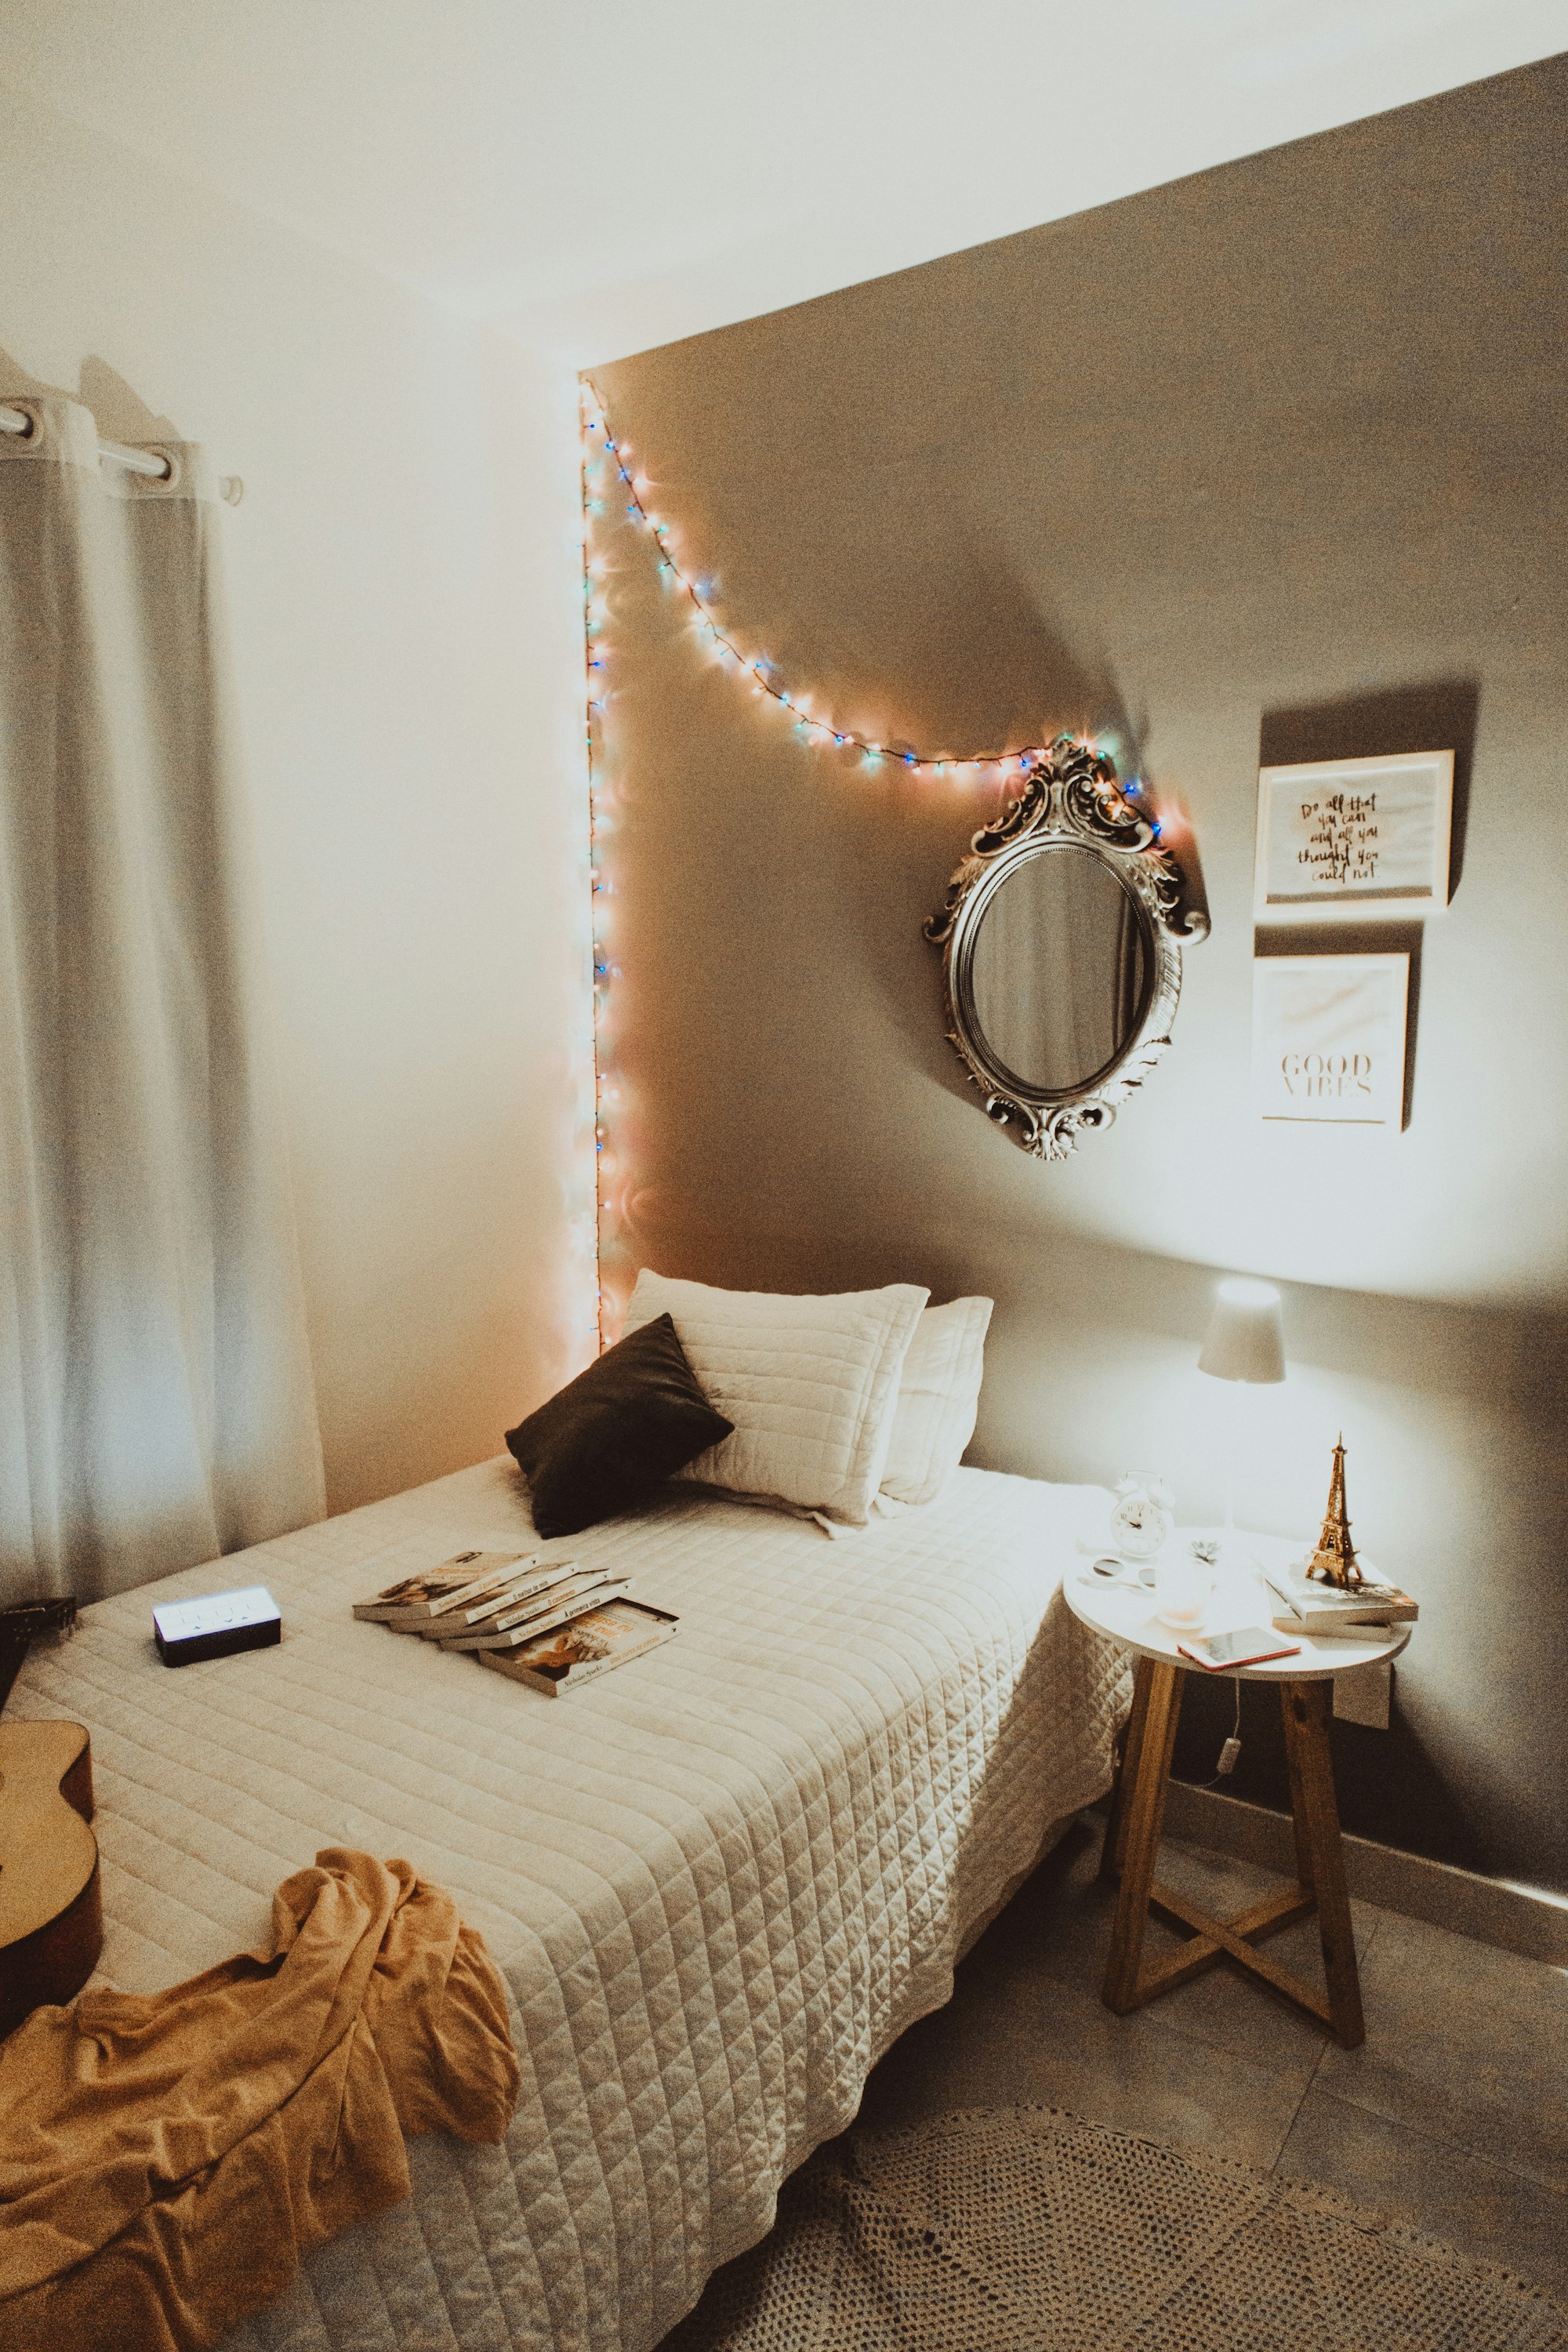 single bed with books and guitar